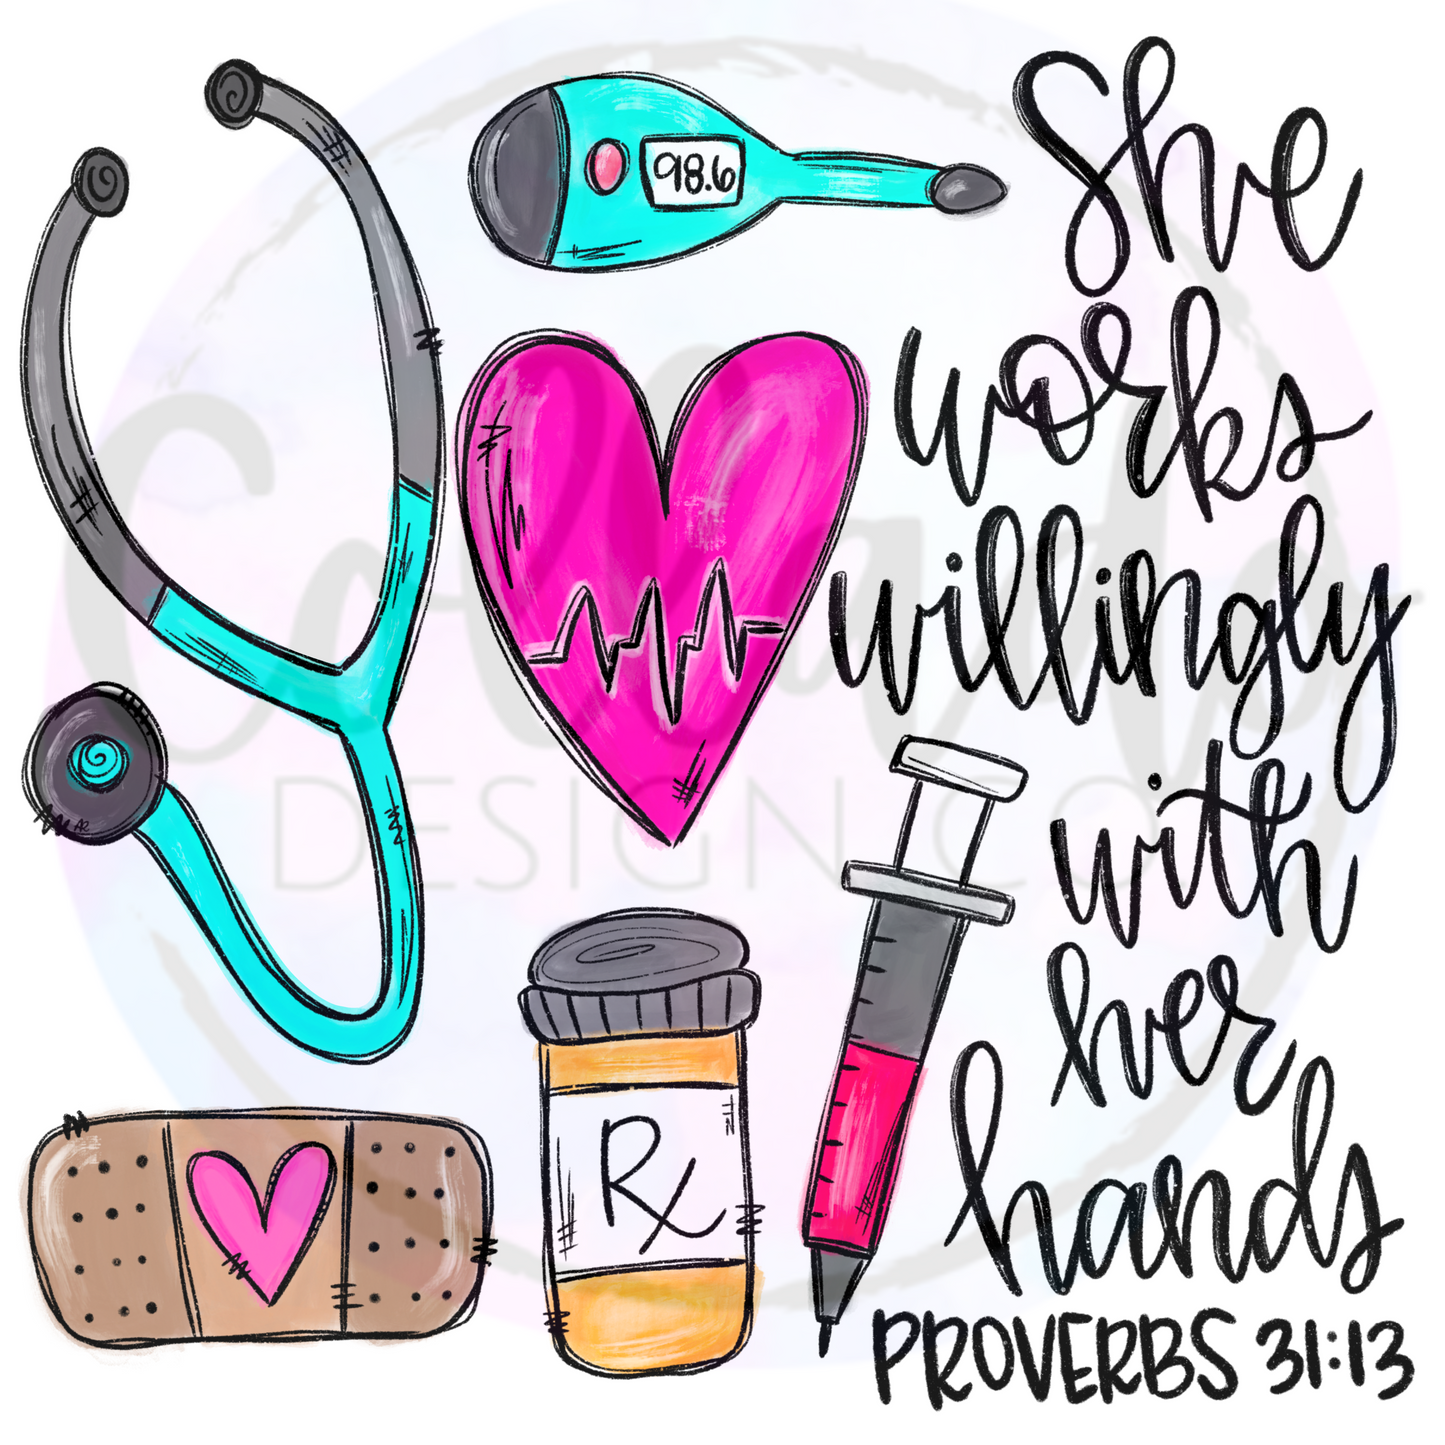 She Works Willingly With Her Hands - Nurse